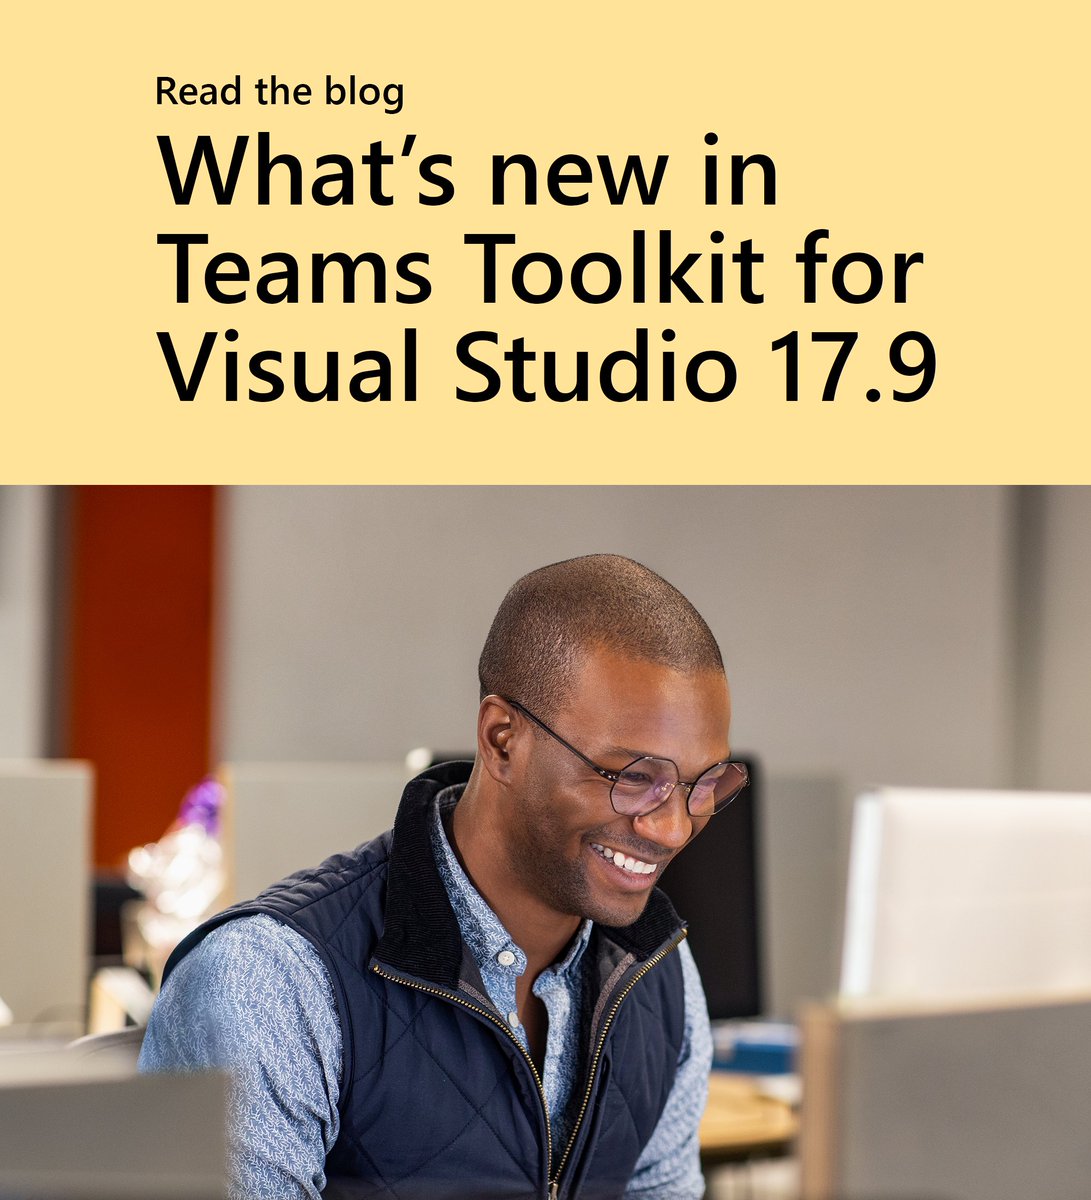 Find out what’s new in Teams Toolkit for Visual Studio 17.9. Discover everything that’s included for .NET developers to build apps for Microsoft Teams in the latest version. #VisualStudio #dotNET #Microsoft365 msft.it/6010cNmlw